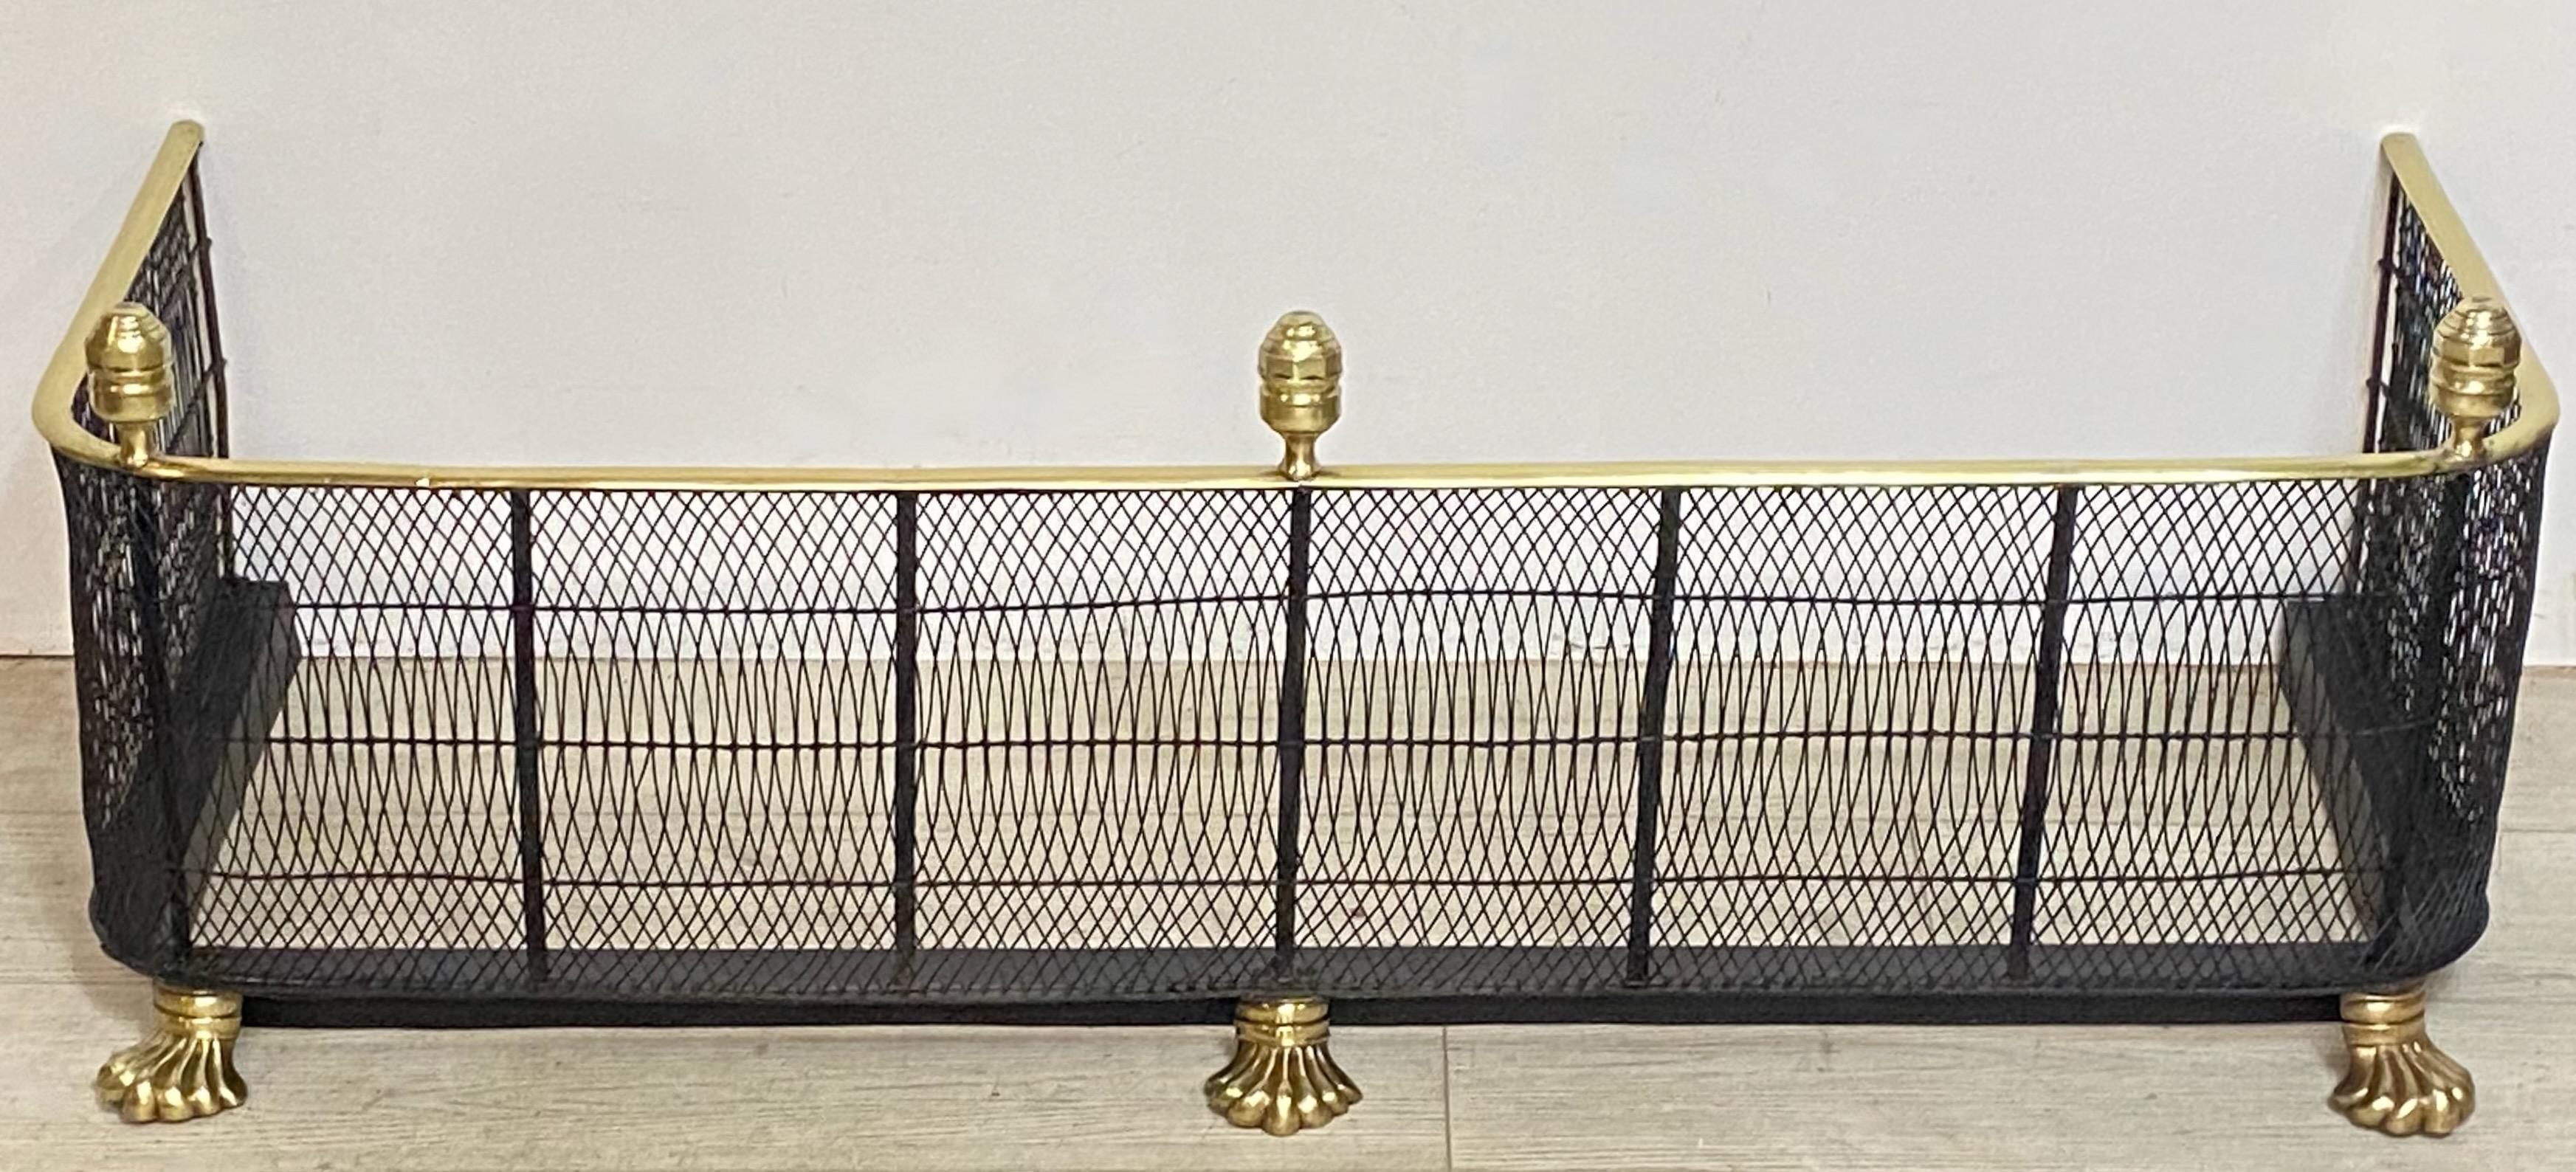 An Early American wire work fire place fender with a brass rail top, centered iron supports, and the original three turned brass finials on brass paw feet.
Early 19th century, Circa 1810.
High quality, beautifully made, in excellent antique